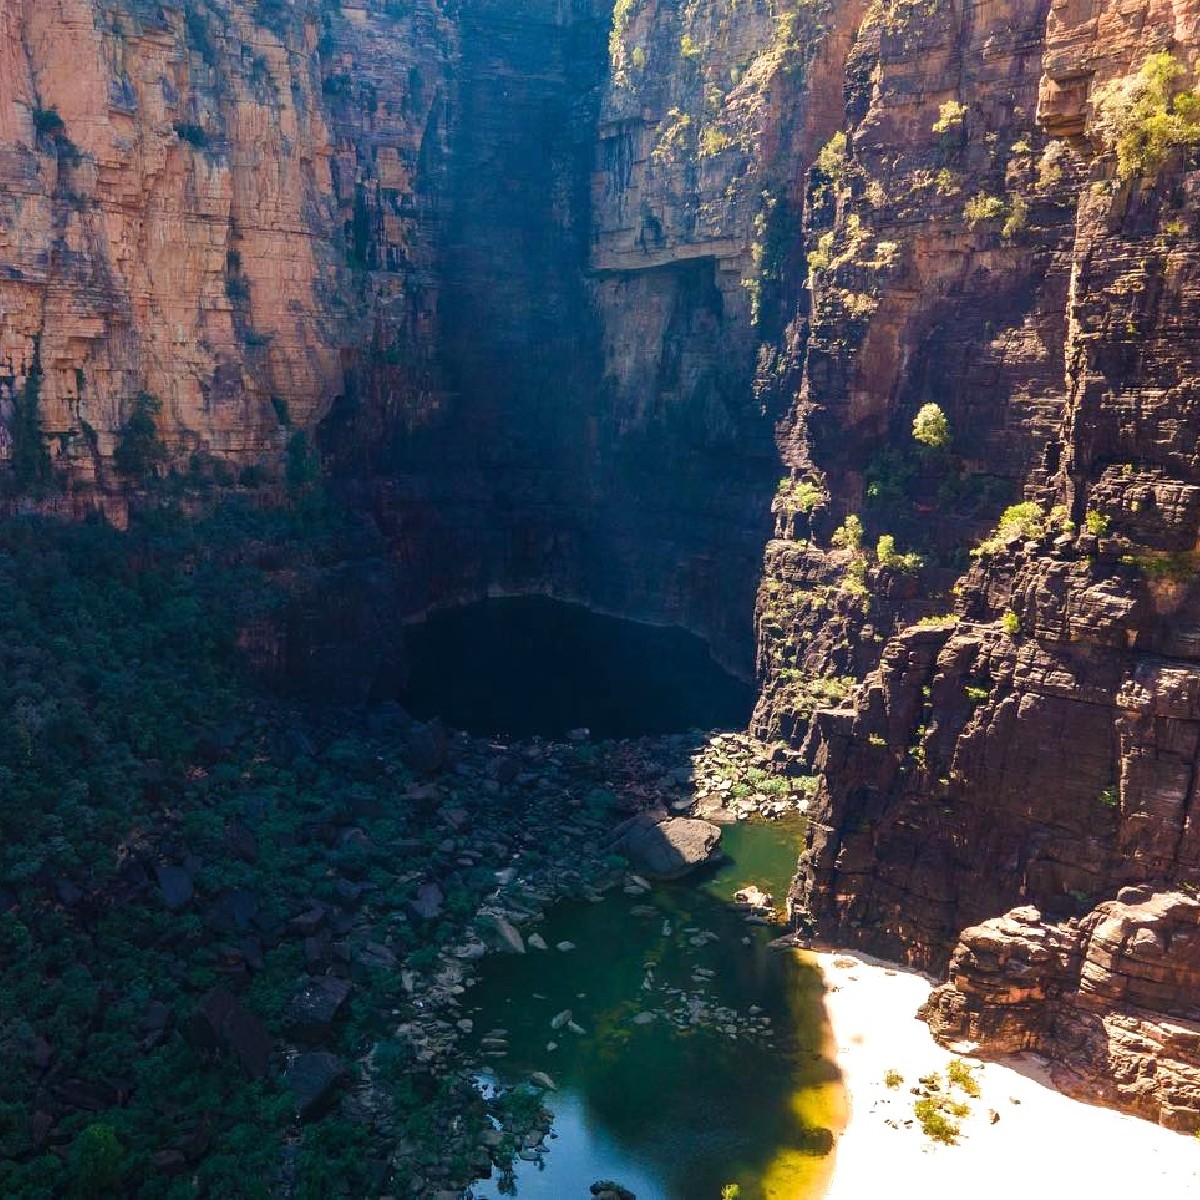 What gets you excited for the weekend? For us, it's getting outdoors and exploring the stunning and ancient landscape of Kakadu National Park. There is so much to see and experience within Kakadu’s 20,000 square kilometres. 📸 Images of Jim Jim Falls by @theaussiedreamers